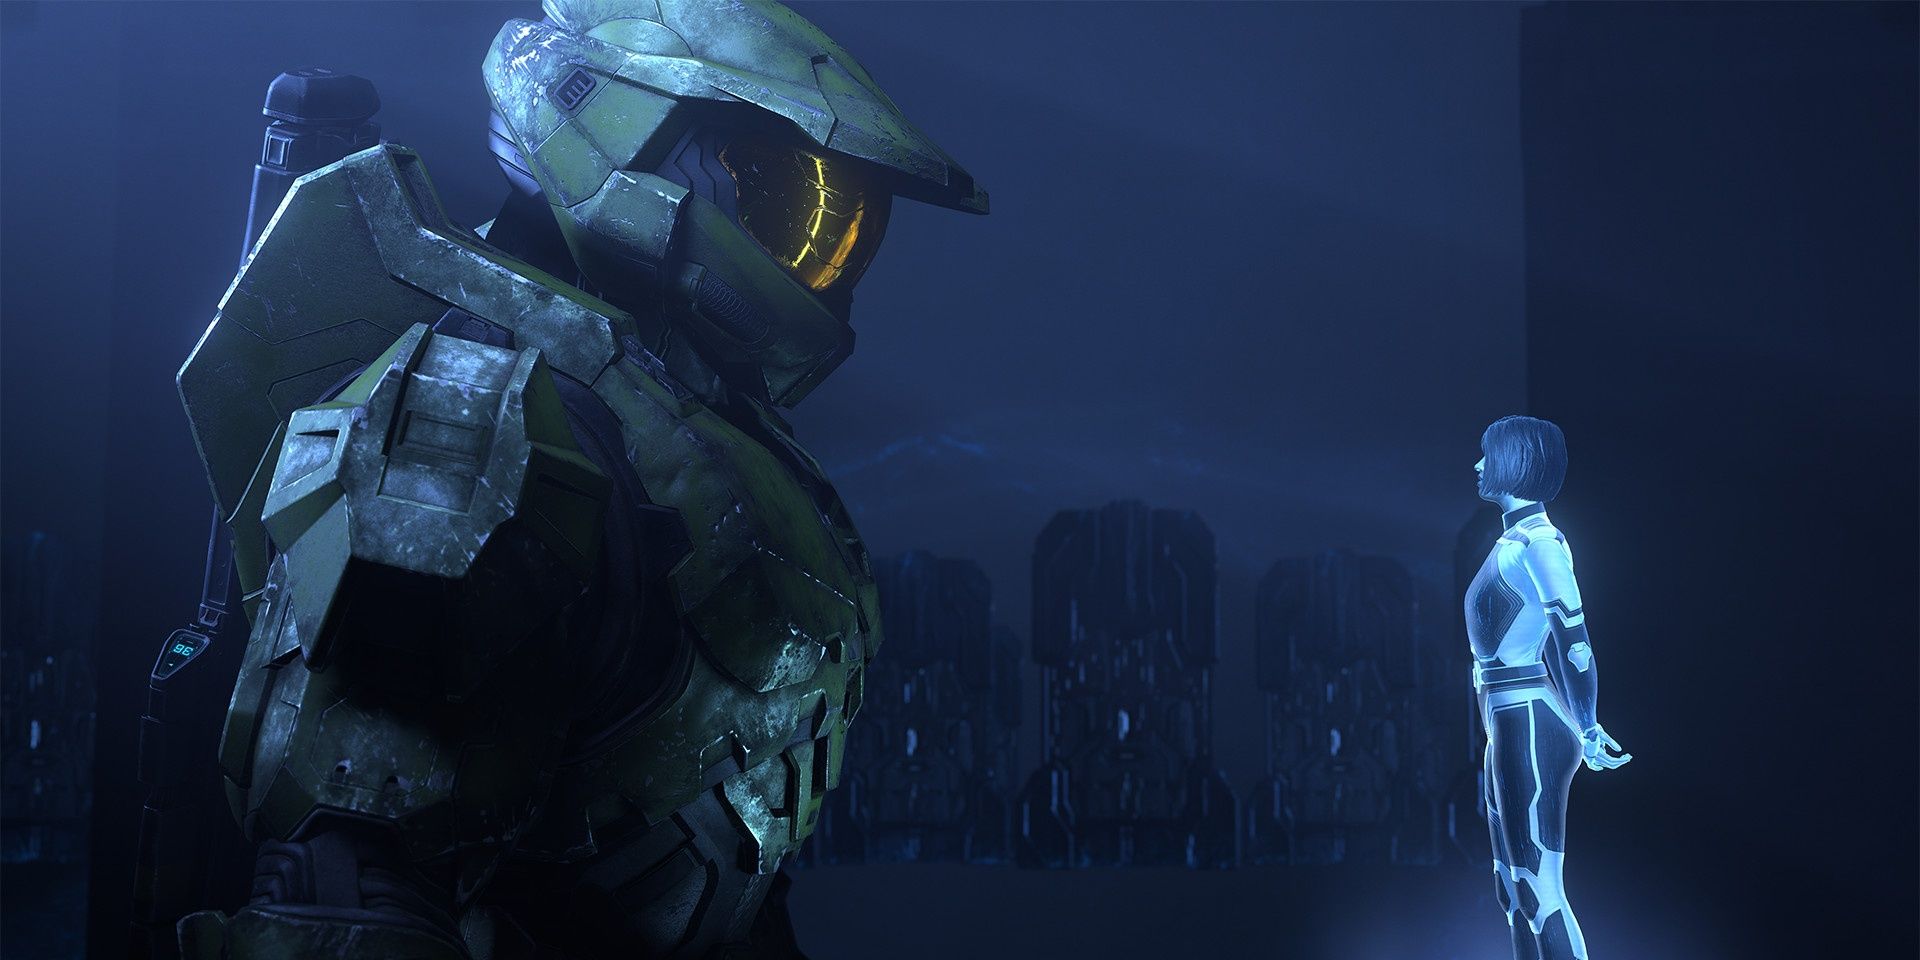 A screenshot showing Master Chief and The Weapon in Halo Infinite